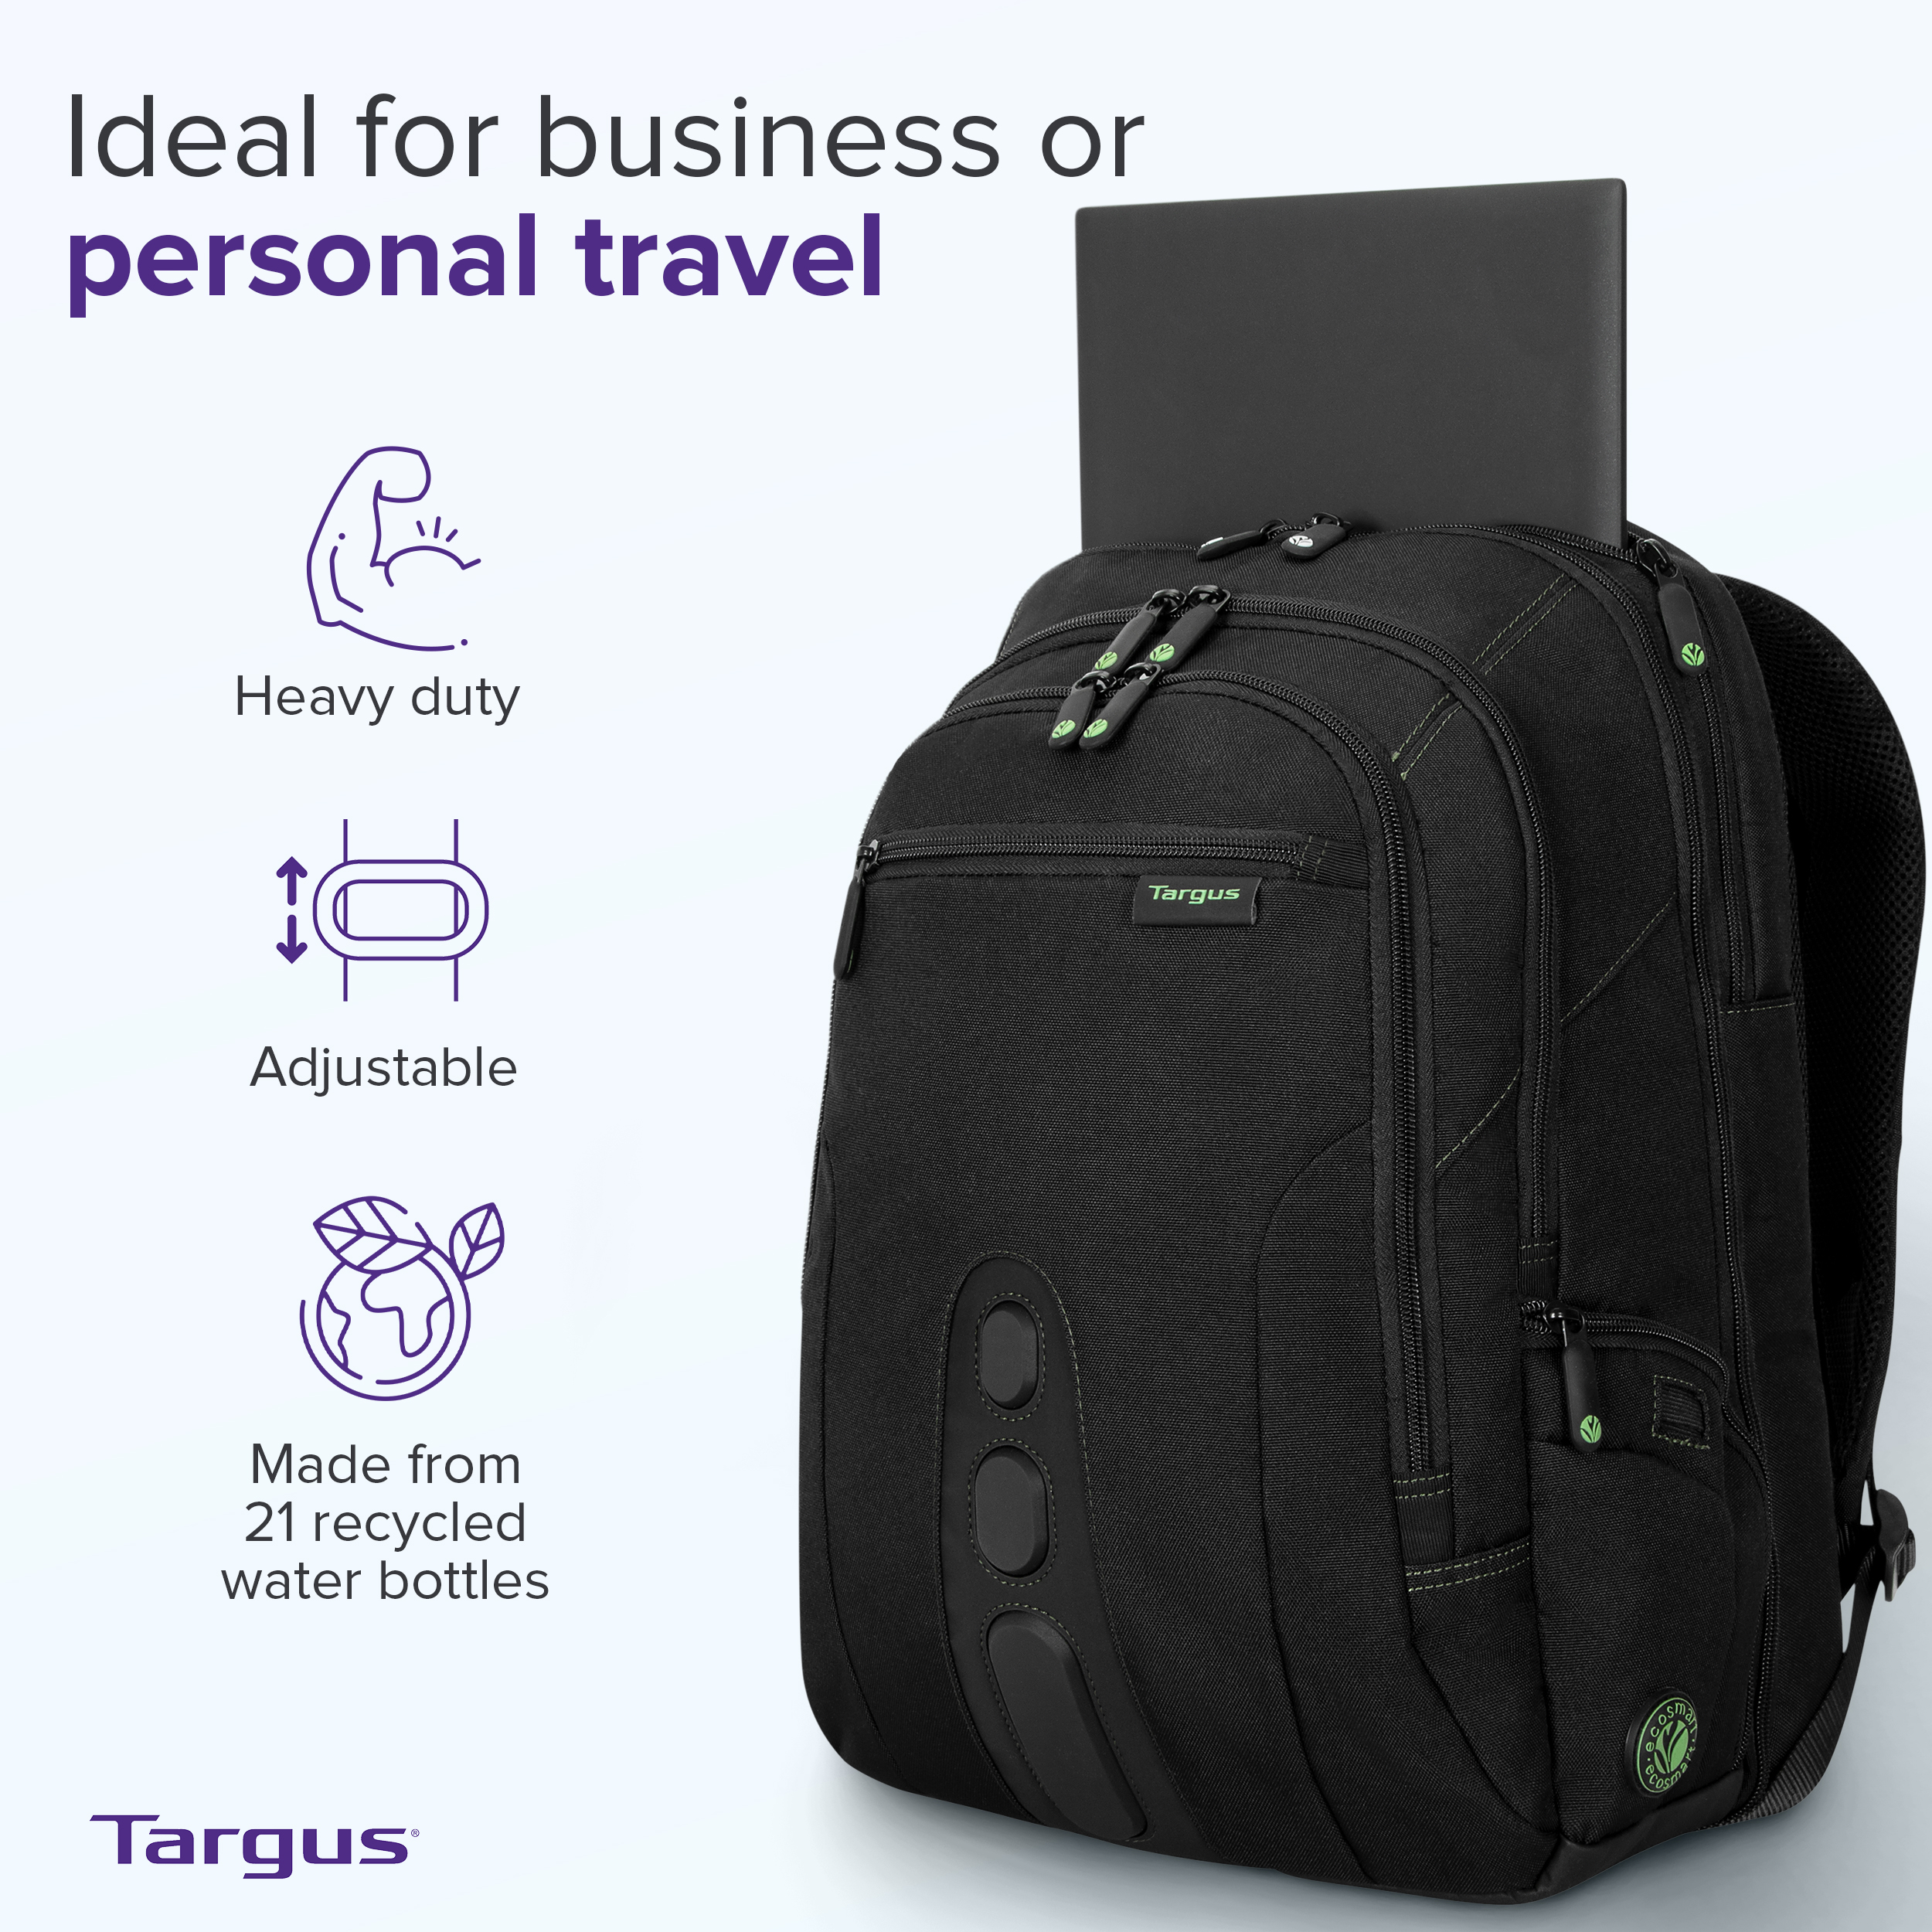 Targus EcoSmart TBB019US Carrying Case (Backpack) for 17" Notebook - Black, Green - image 4 of 9